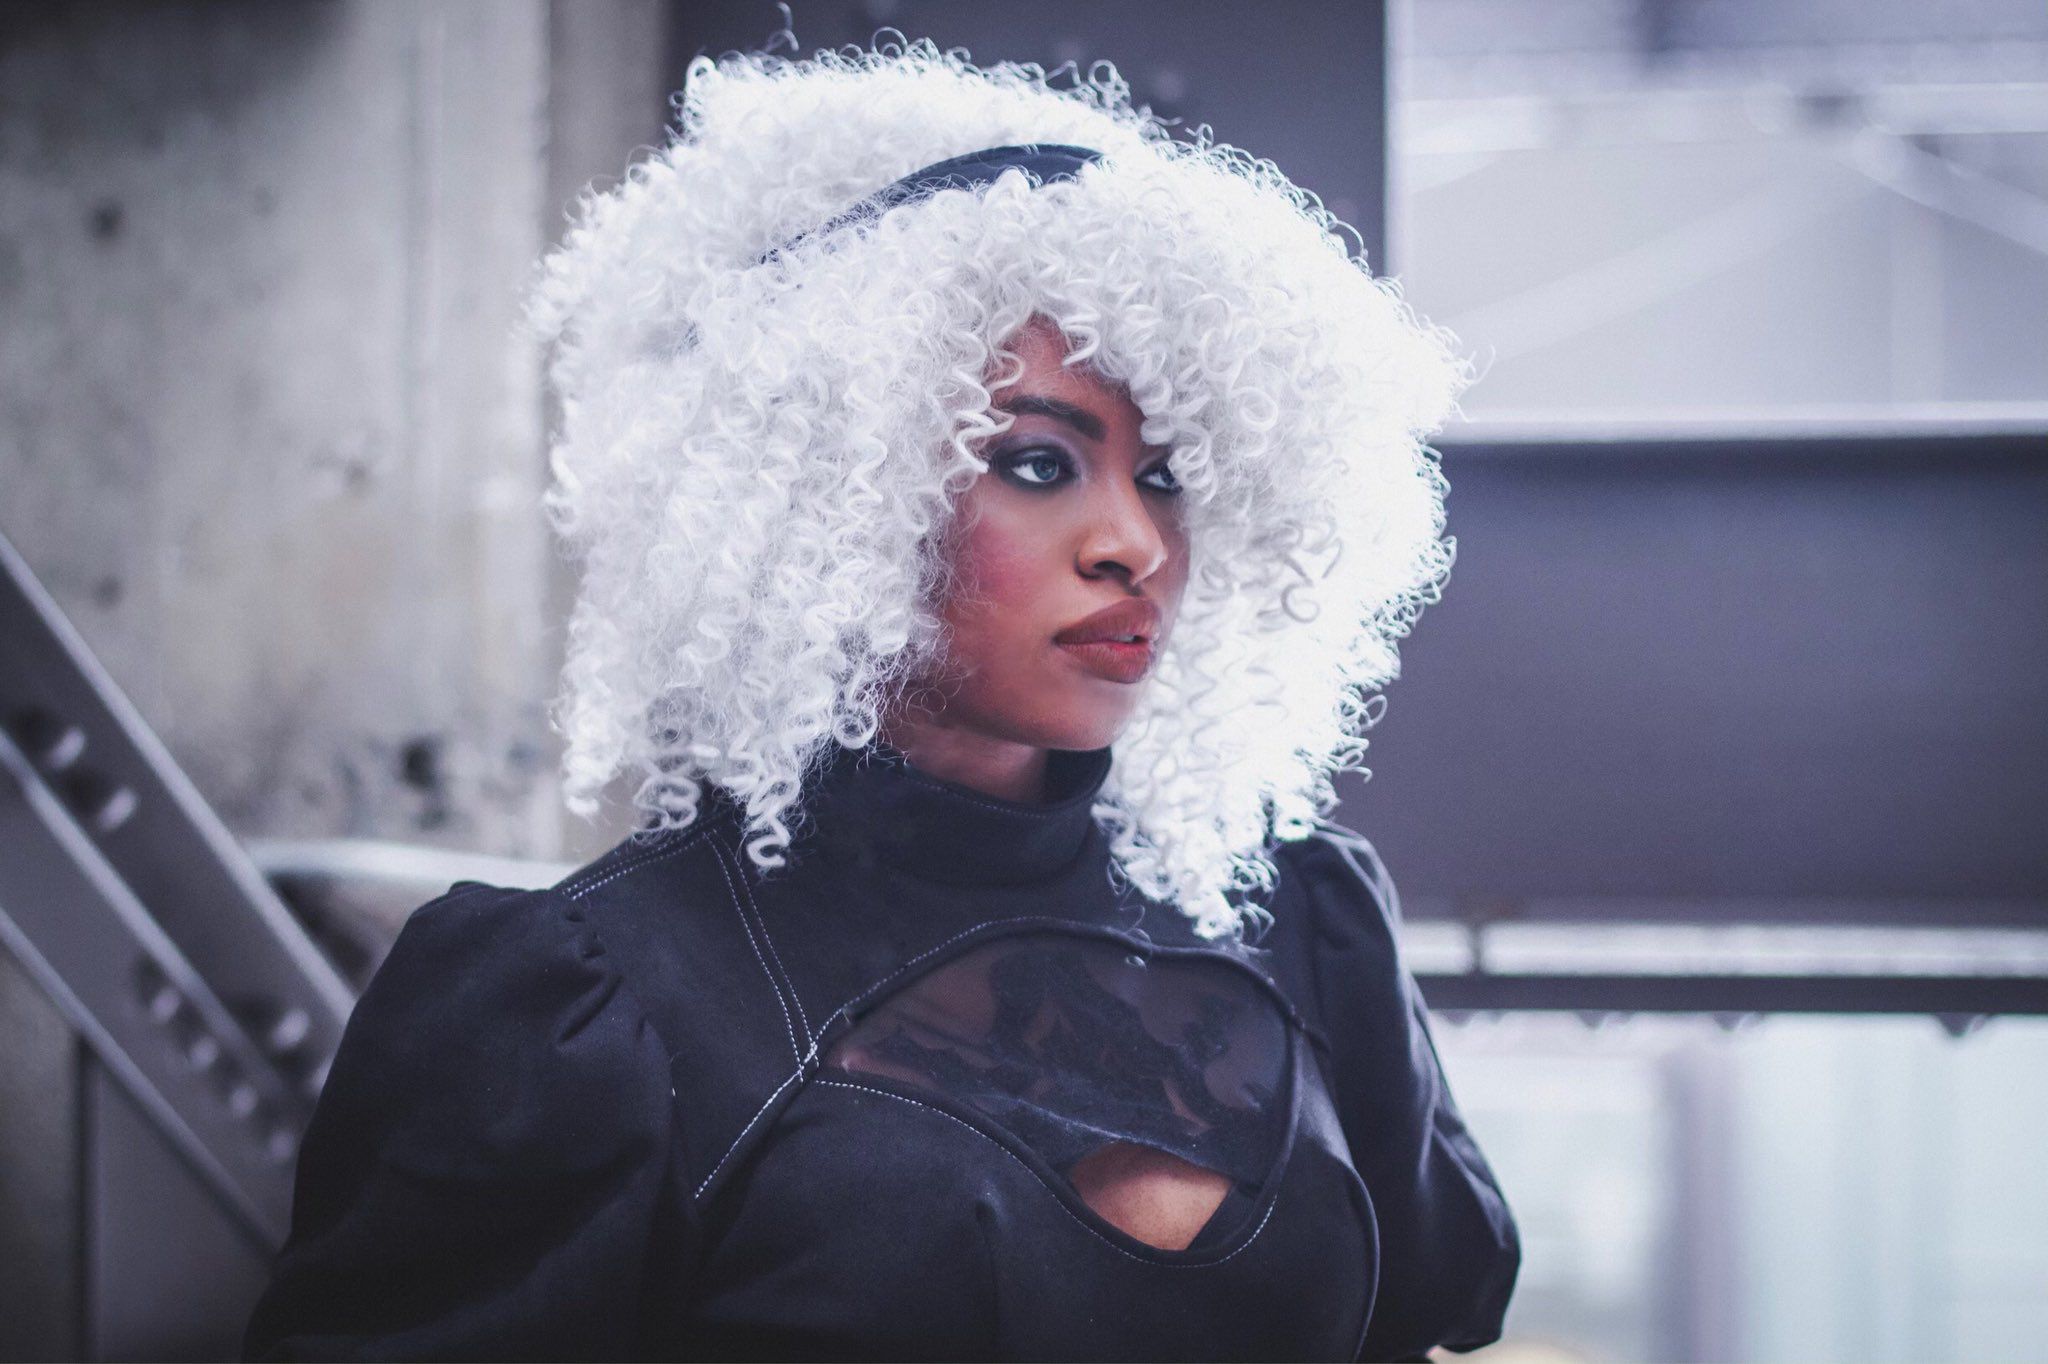 NieR: Automata Cosplay of 2B Adds Curly Haired Chic to a Fan Favorite